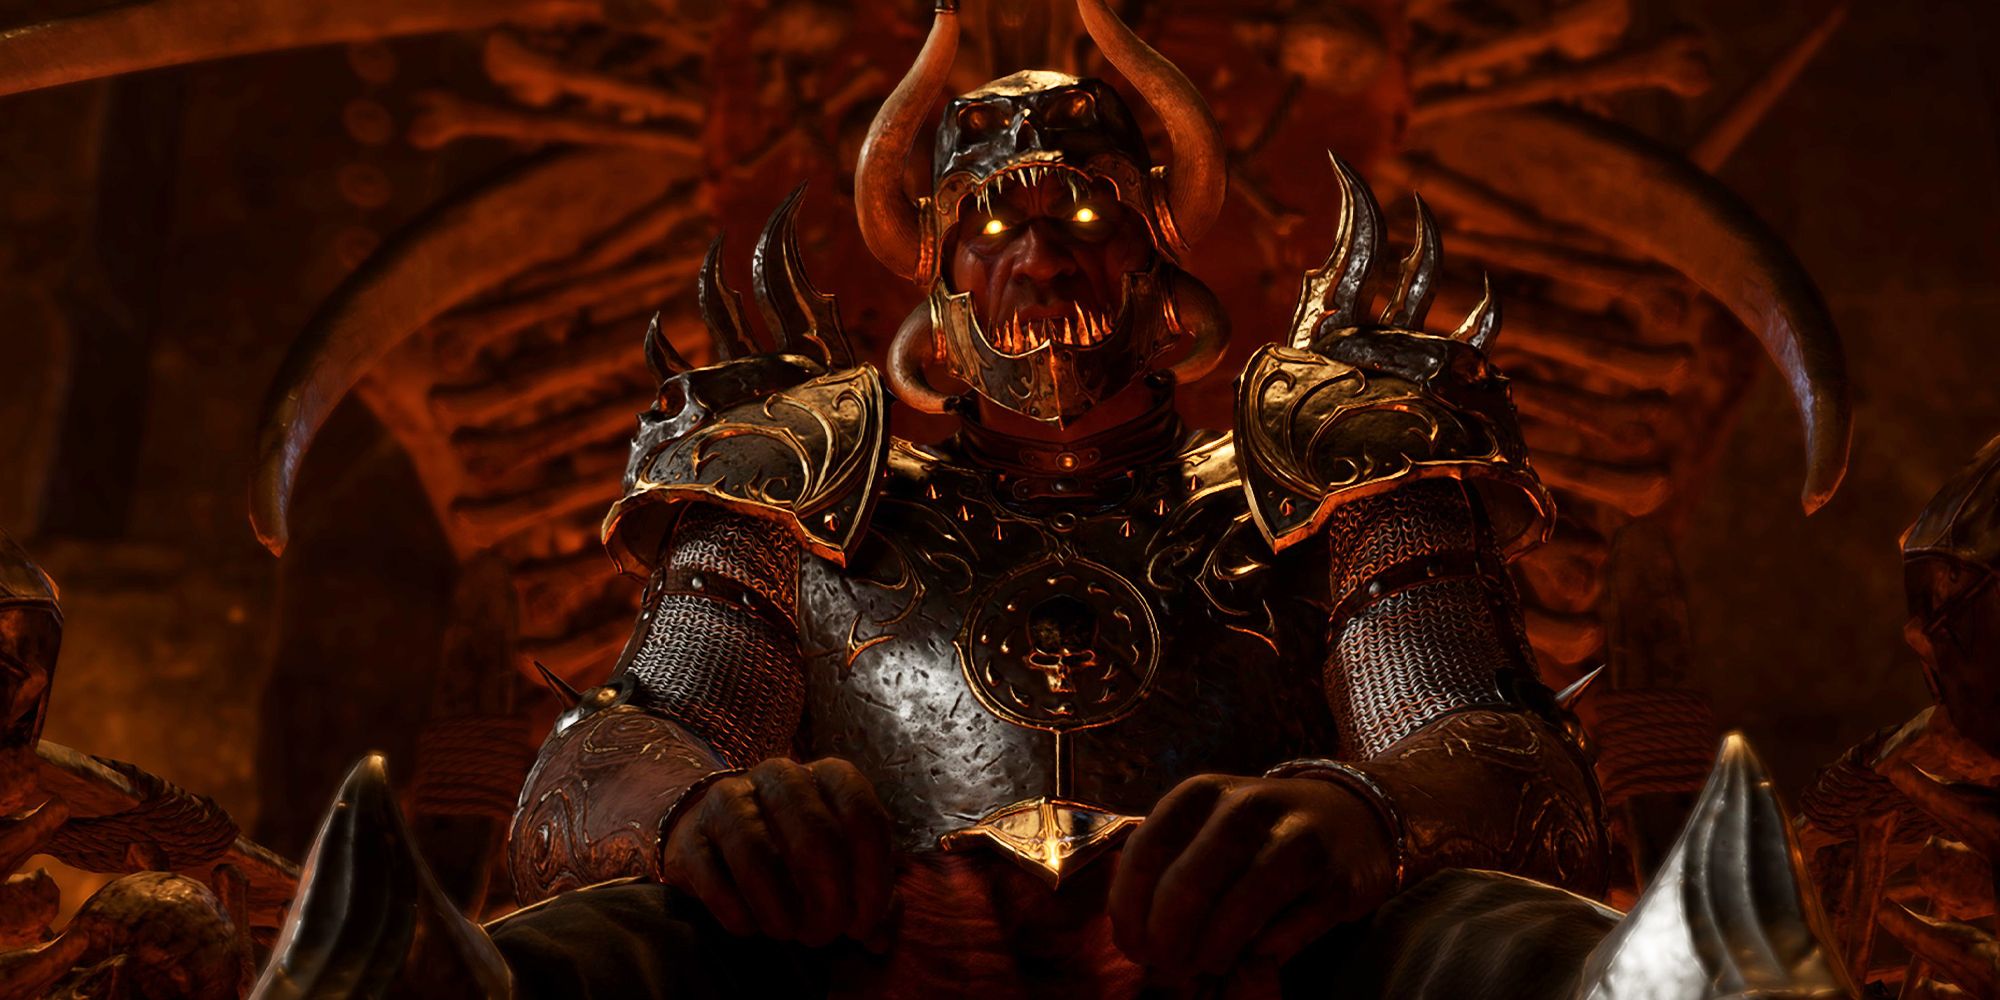 Sarevok Anchev sitting on a throne in Baldurs Gate 3, he has a Bhaal symbol on his chestplate and a helmet with teeth lining its opening, eye sockets at its top, and horns jutting out the sides